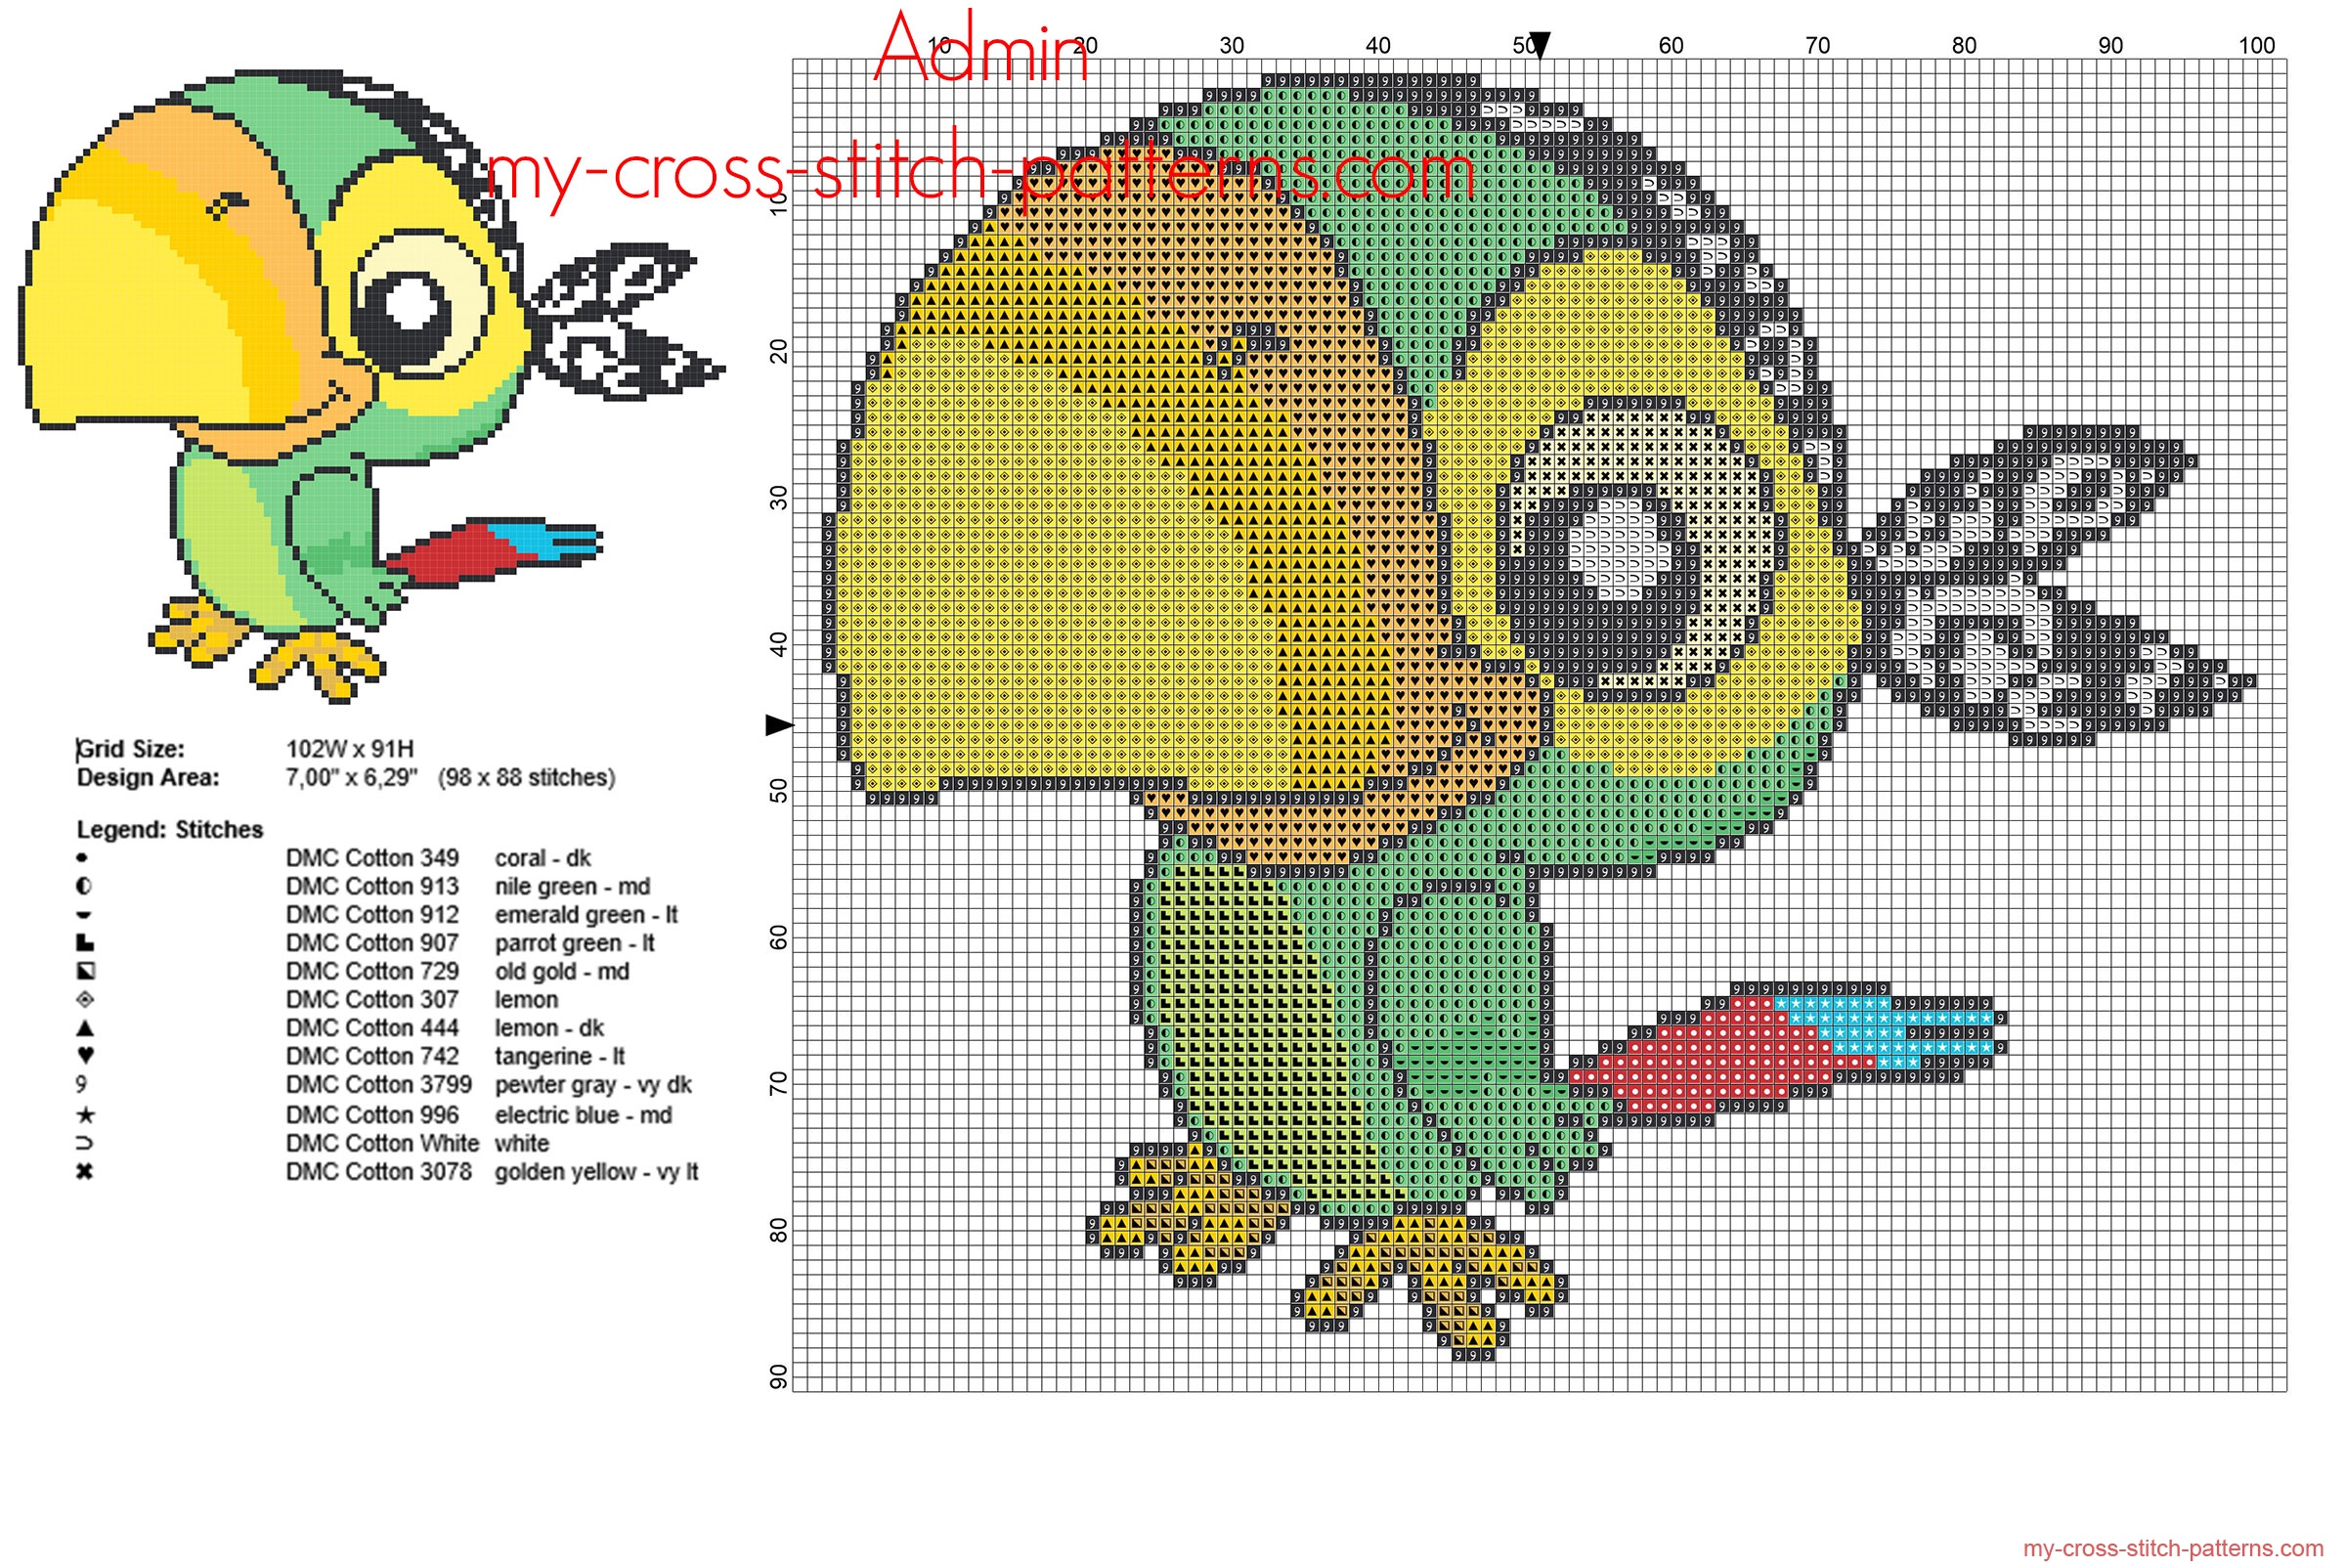 skully_green_parrot_from_disney_cartoon_jake_and_the_never_land_pirates_cross_stitch_pattern